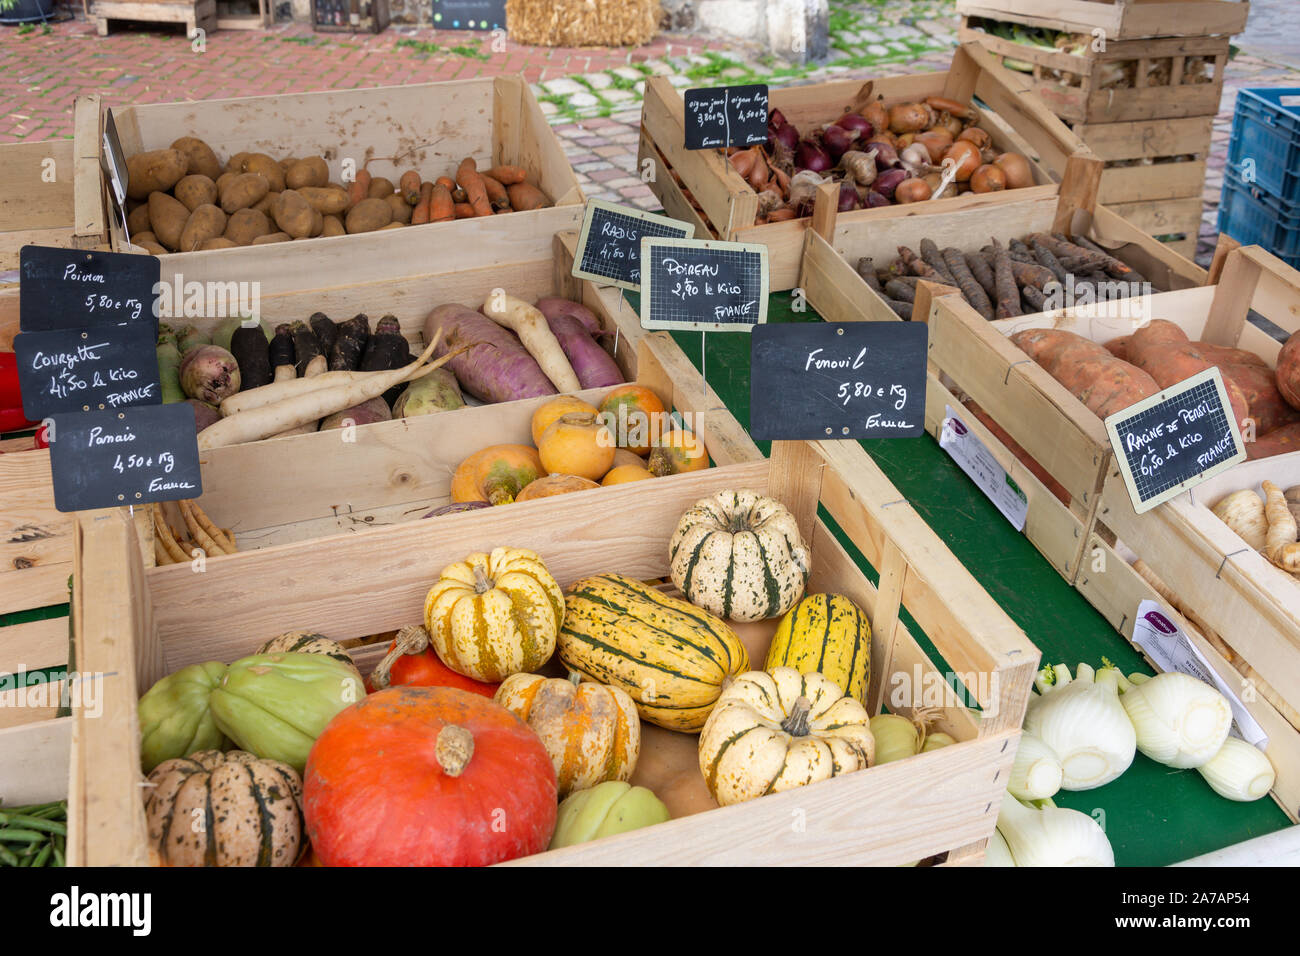 Vegetable selection on market stall, Place de Catherine, Honfleur, Normandy, France Stock Photo